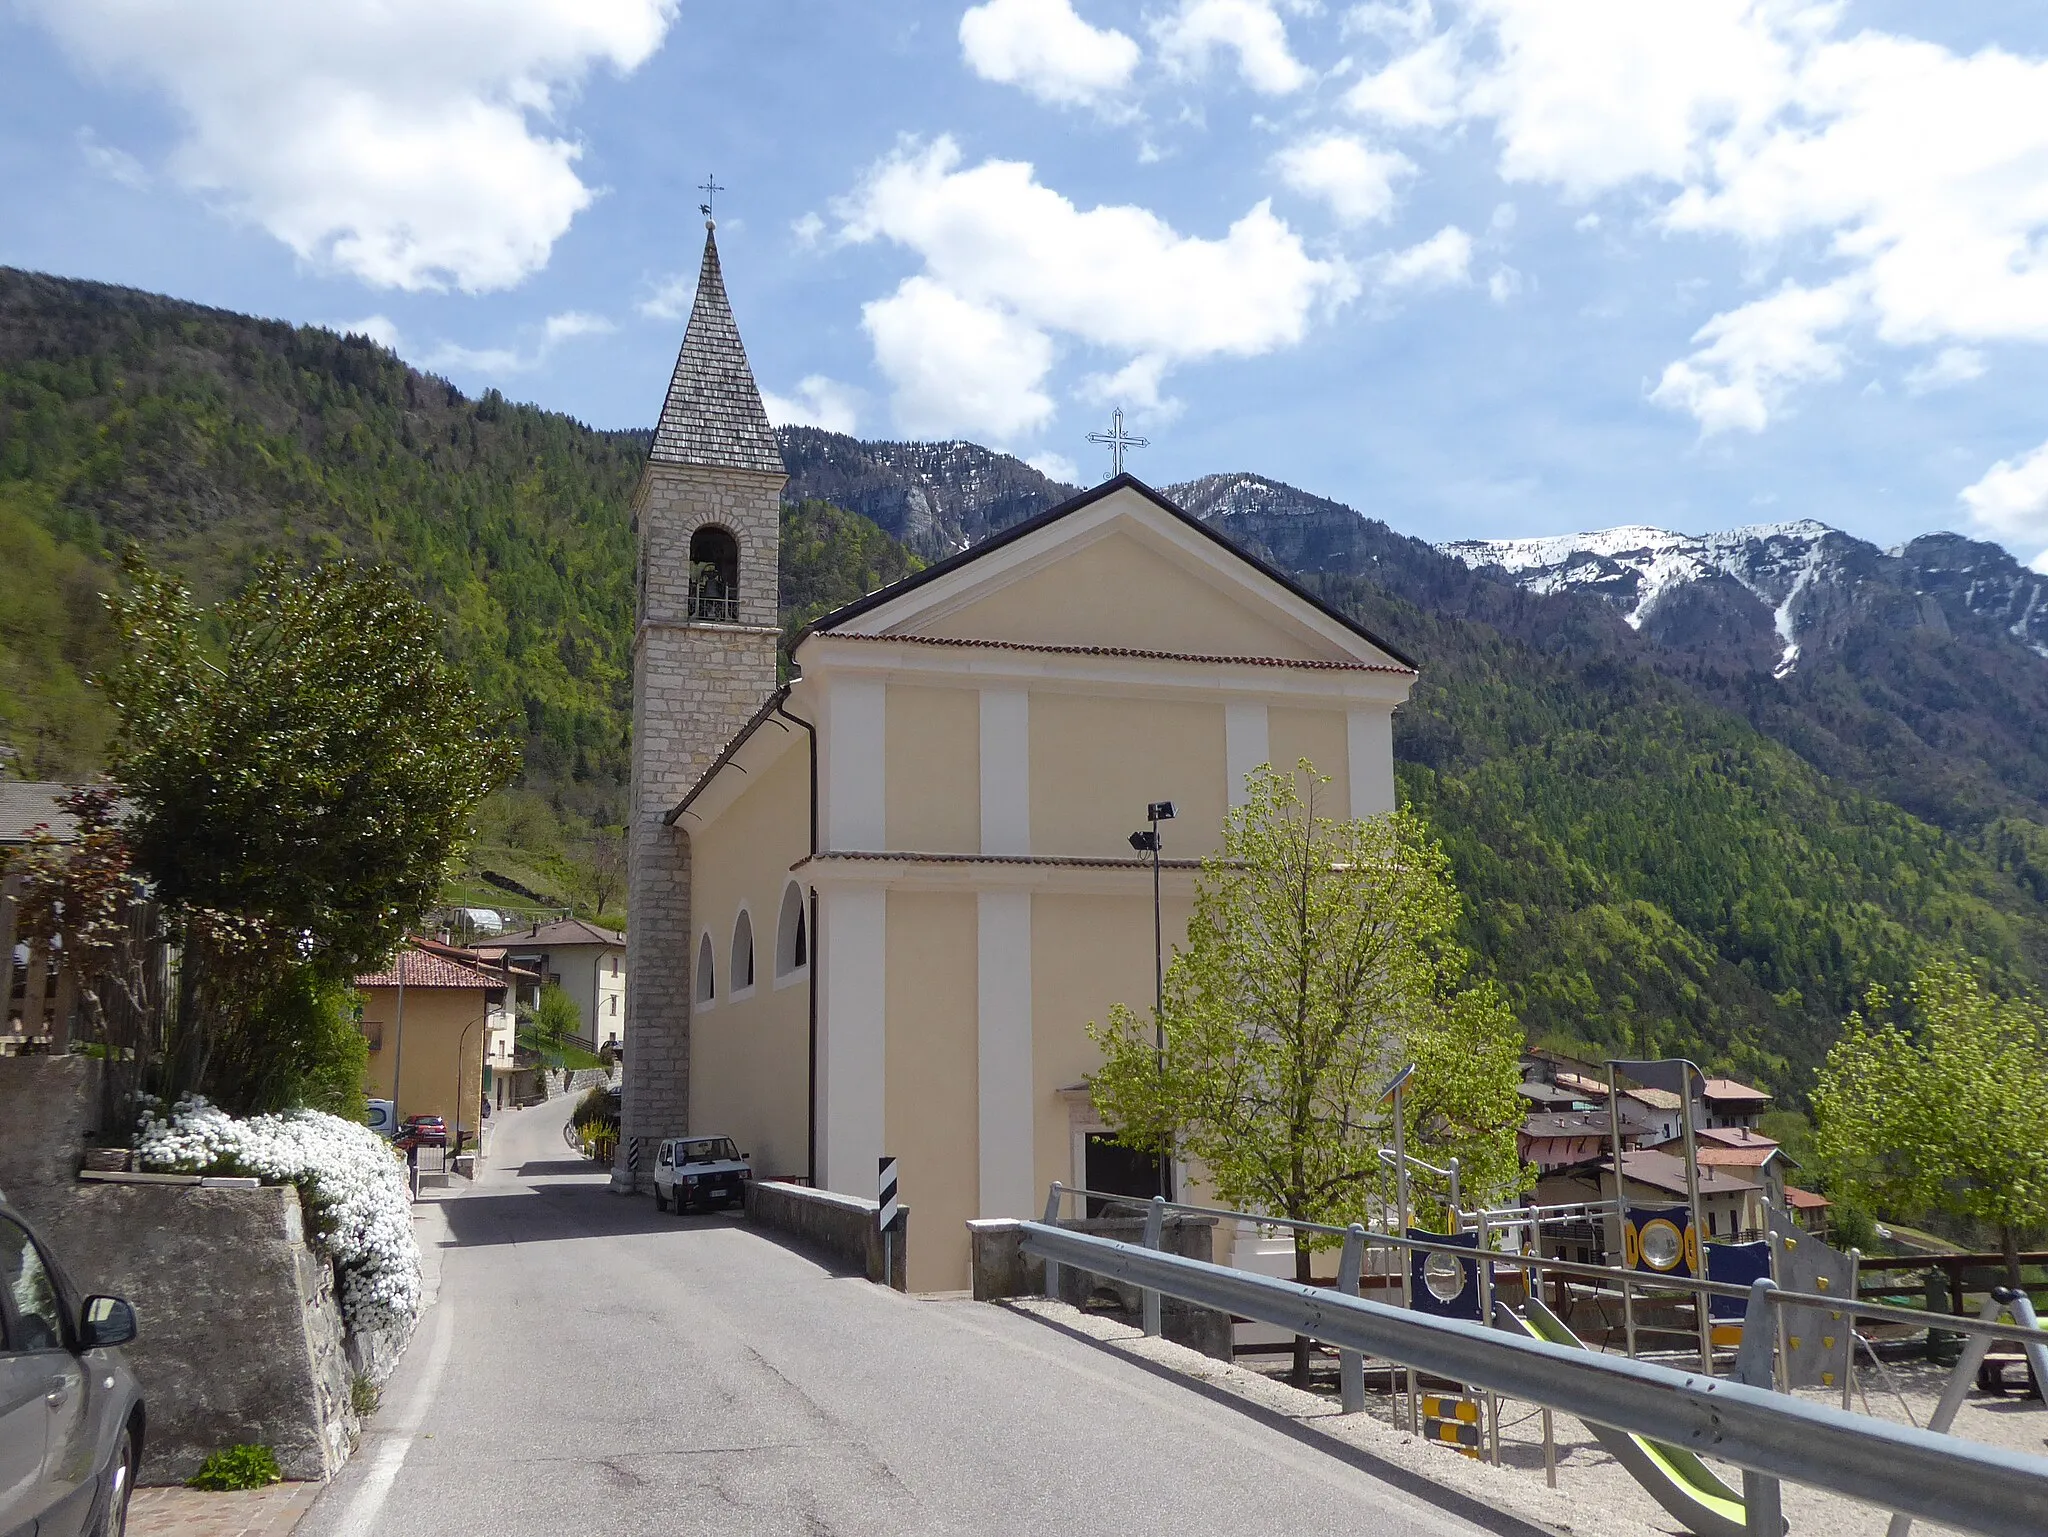 Photo showing: Zoreri (Terragnolo, Trentino, Italy), Immaculate Conception church